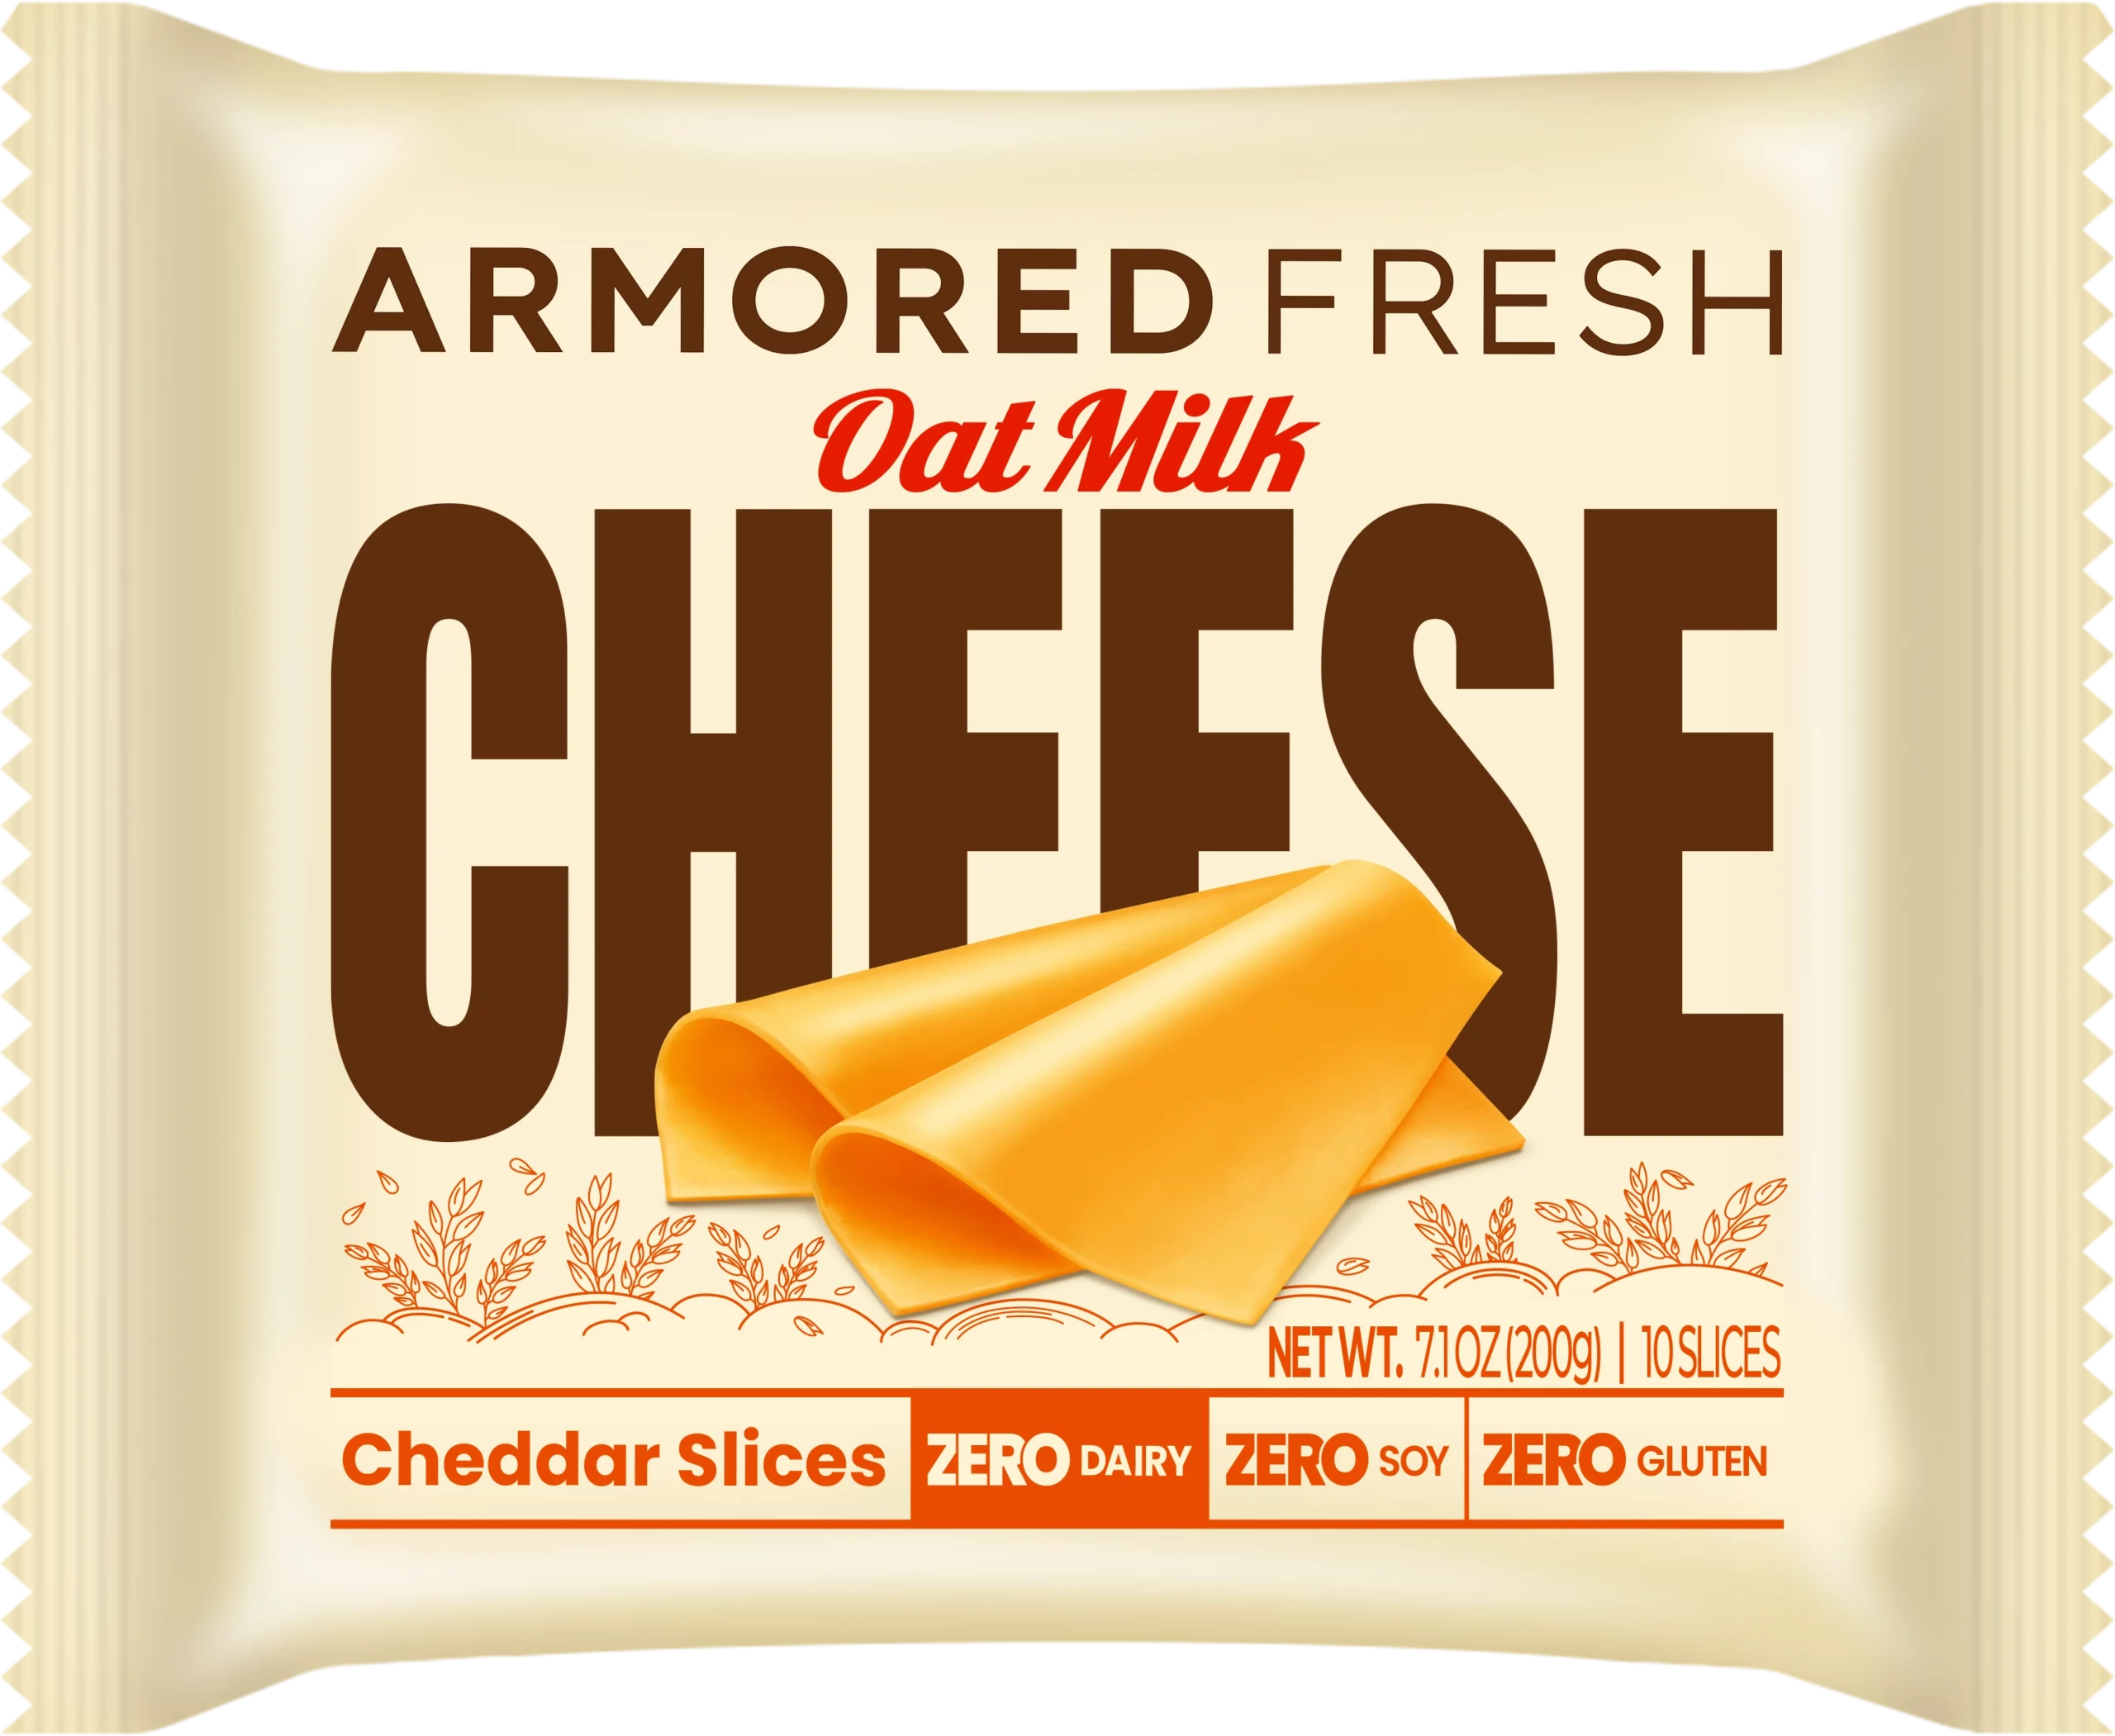 Armored Fresh partners with Bareburger to bring Oat Milk Cheese to New York City Burger Scene